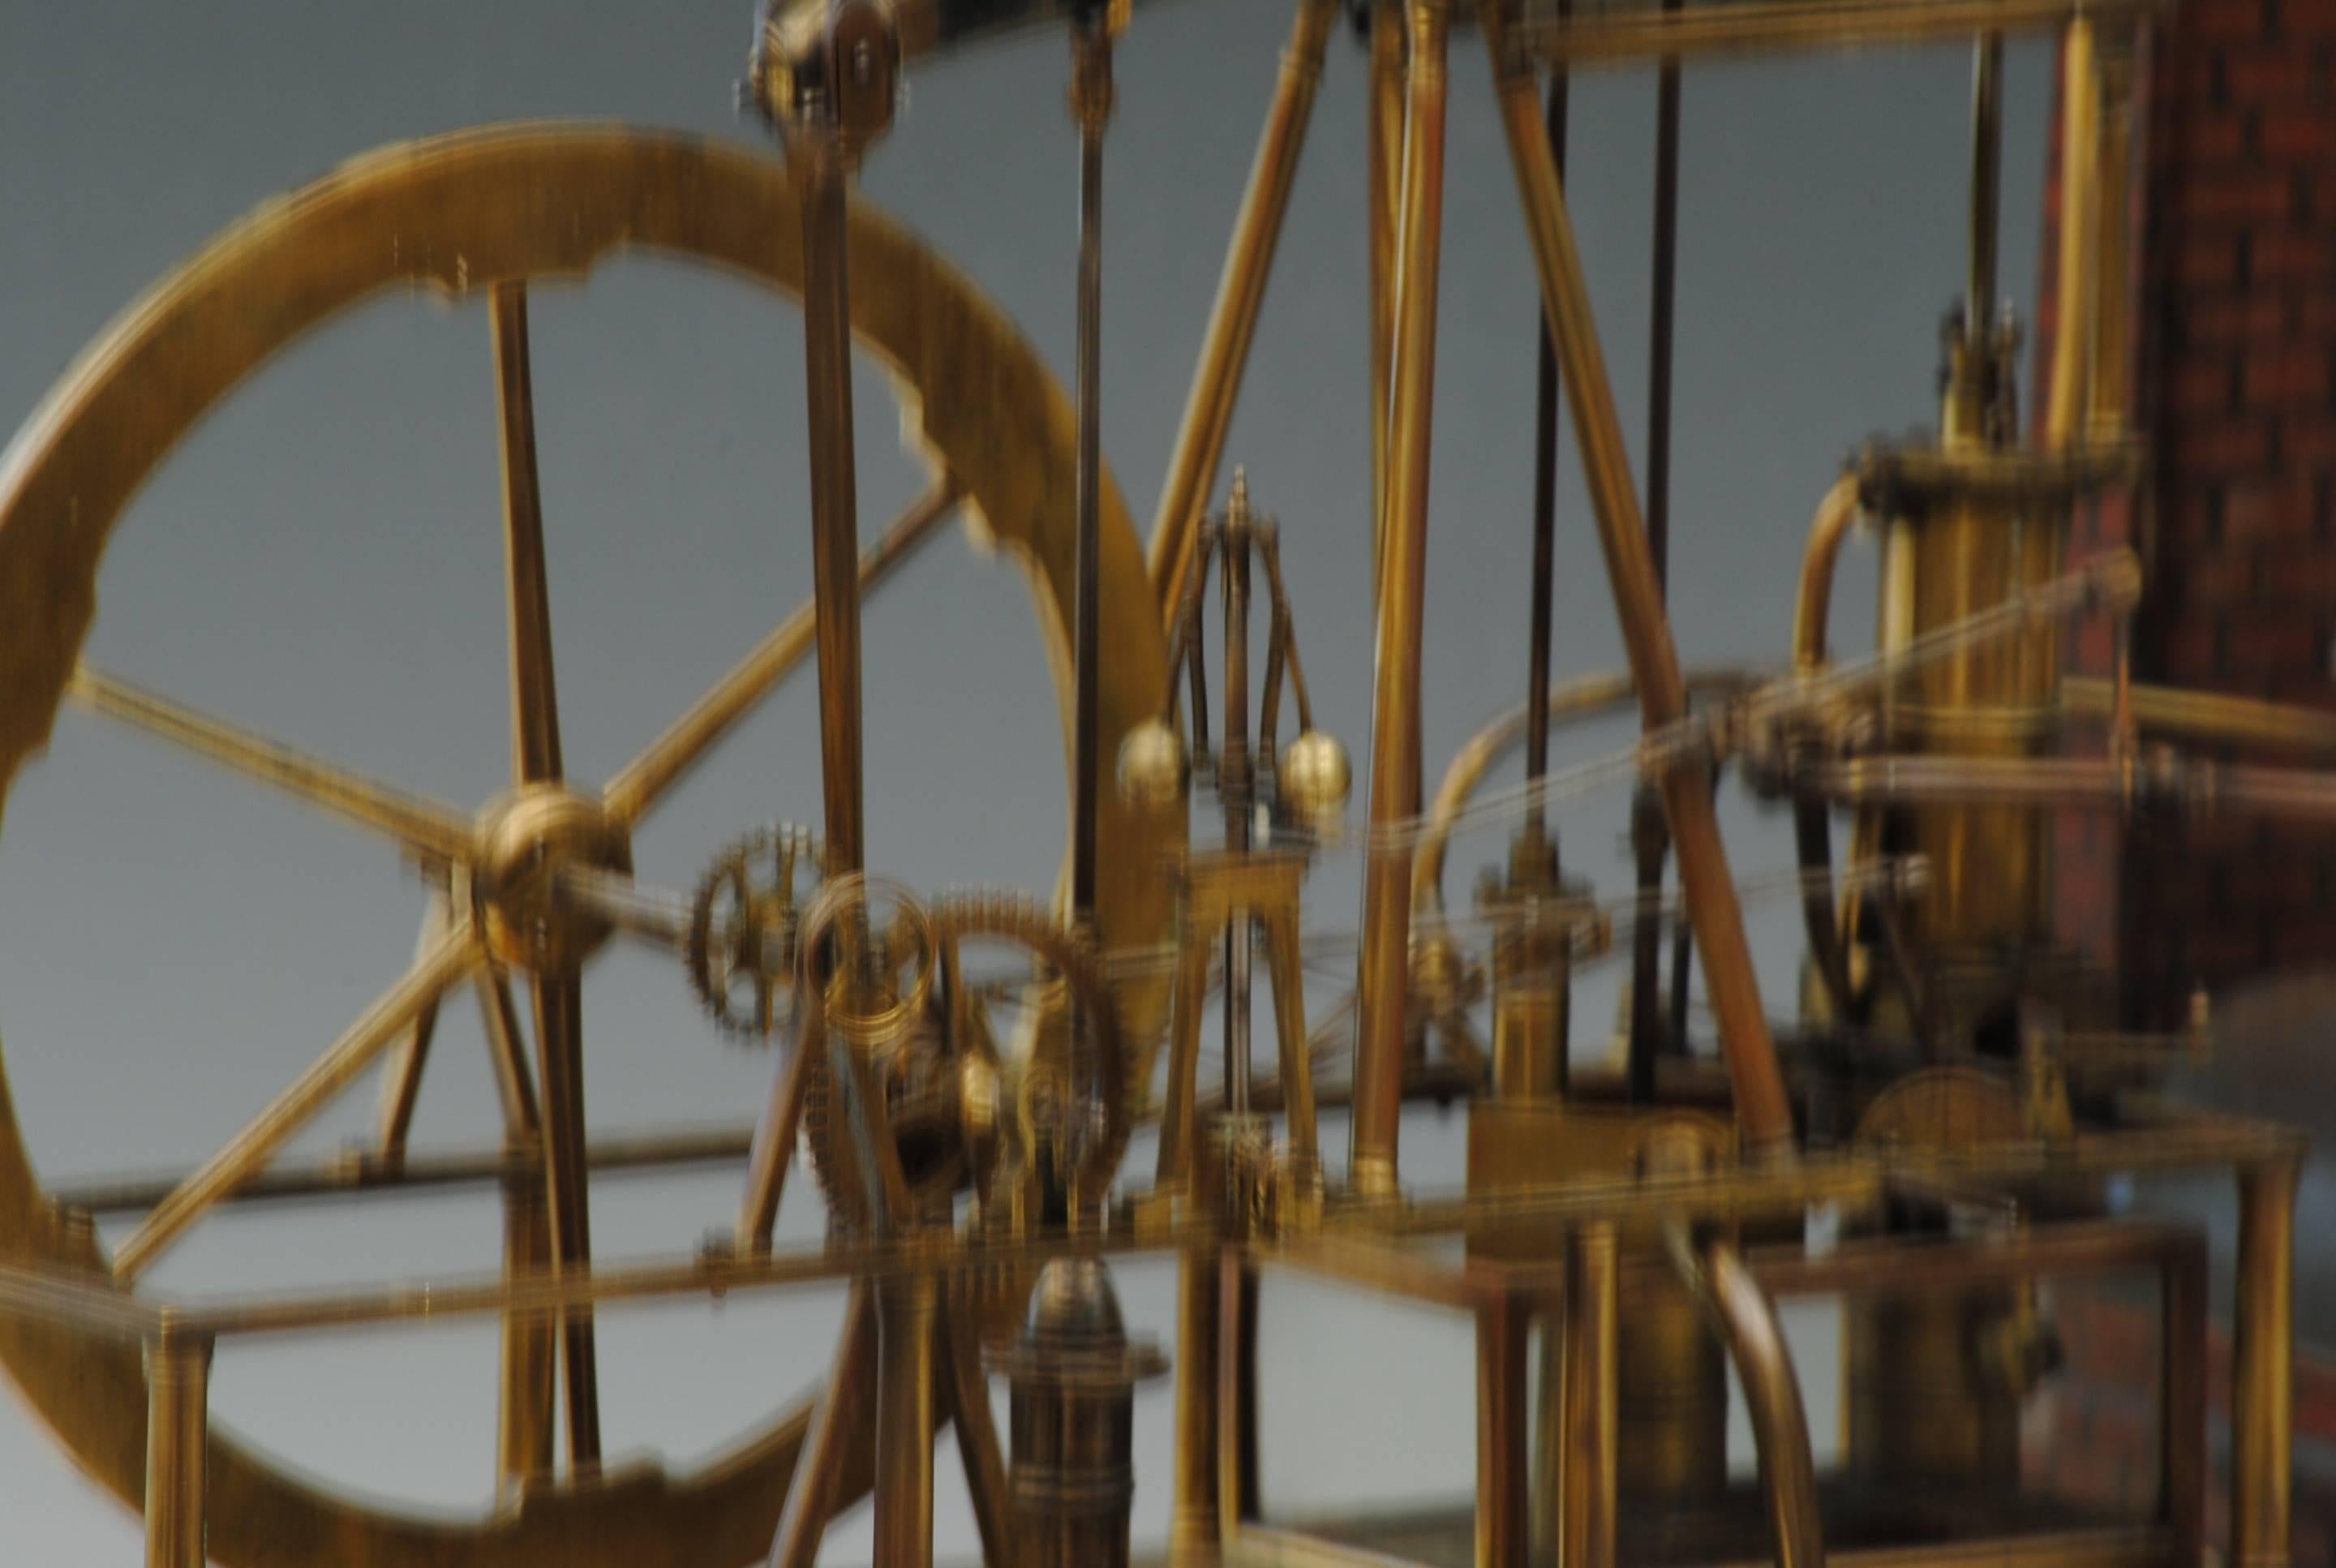 A superbly engineered model of a Watt steam engine by Serles who must have been a watch maker to have made such a fine model.